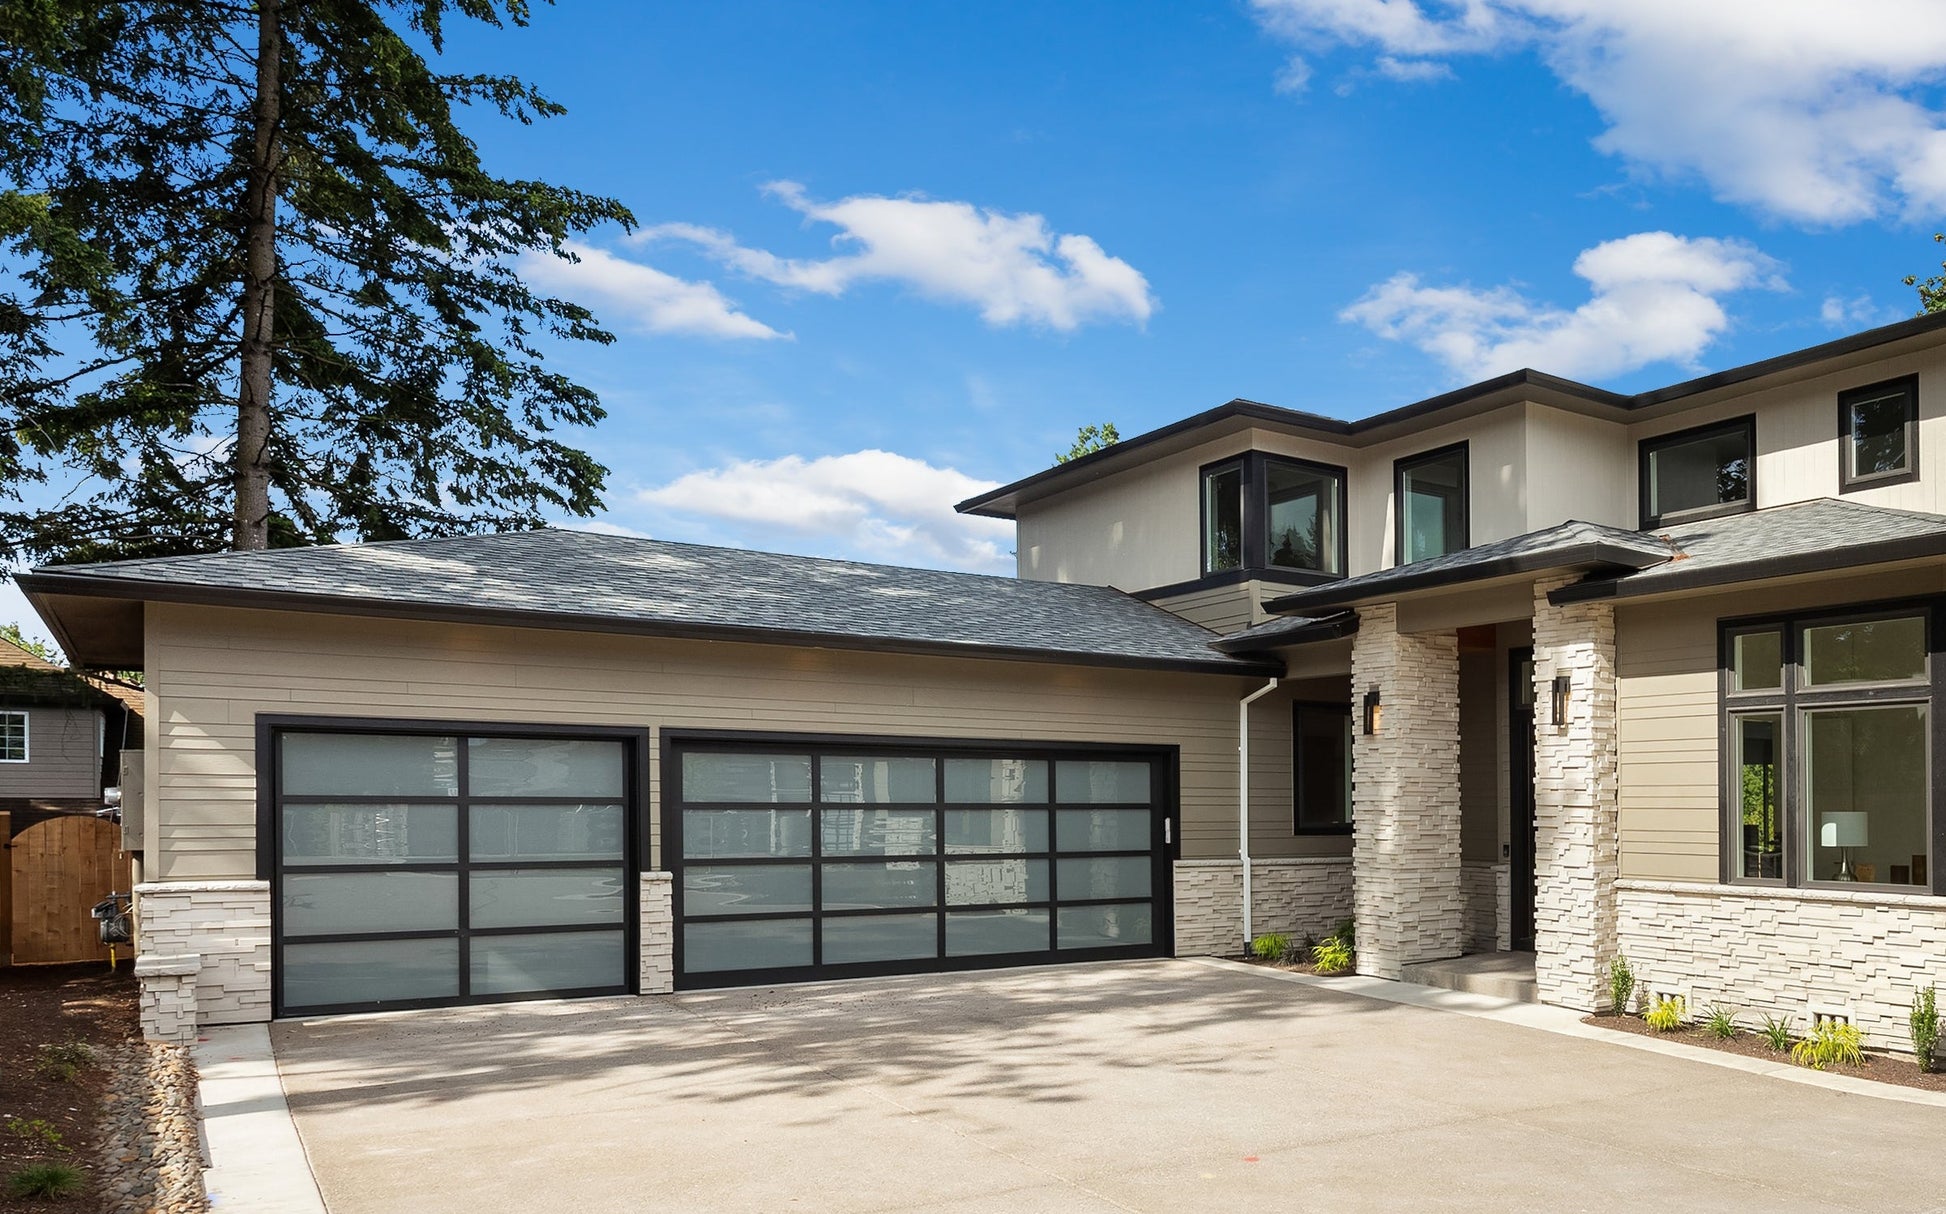 Bright daylight scene of a stylish modern home with matte black garage doors, surrounded by lush landscaping